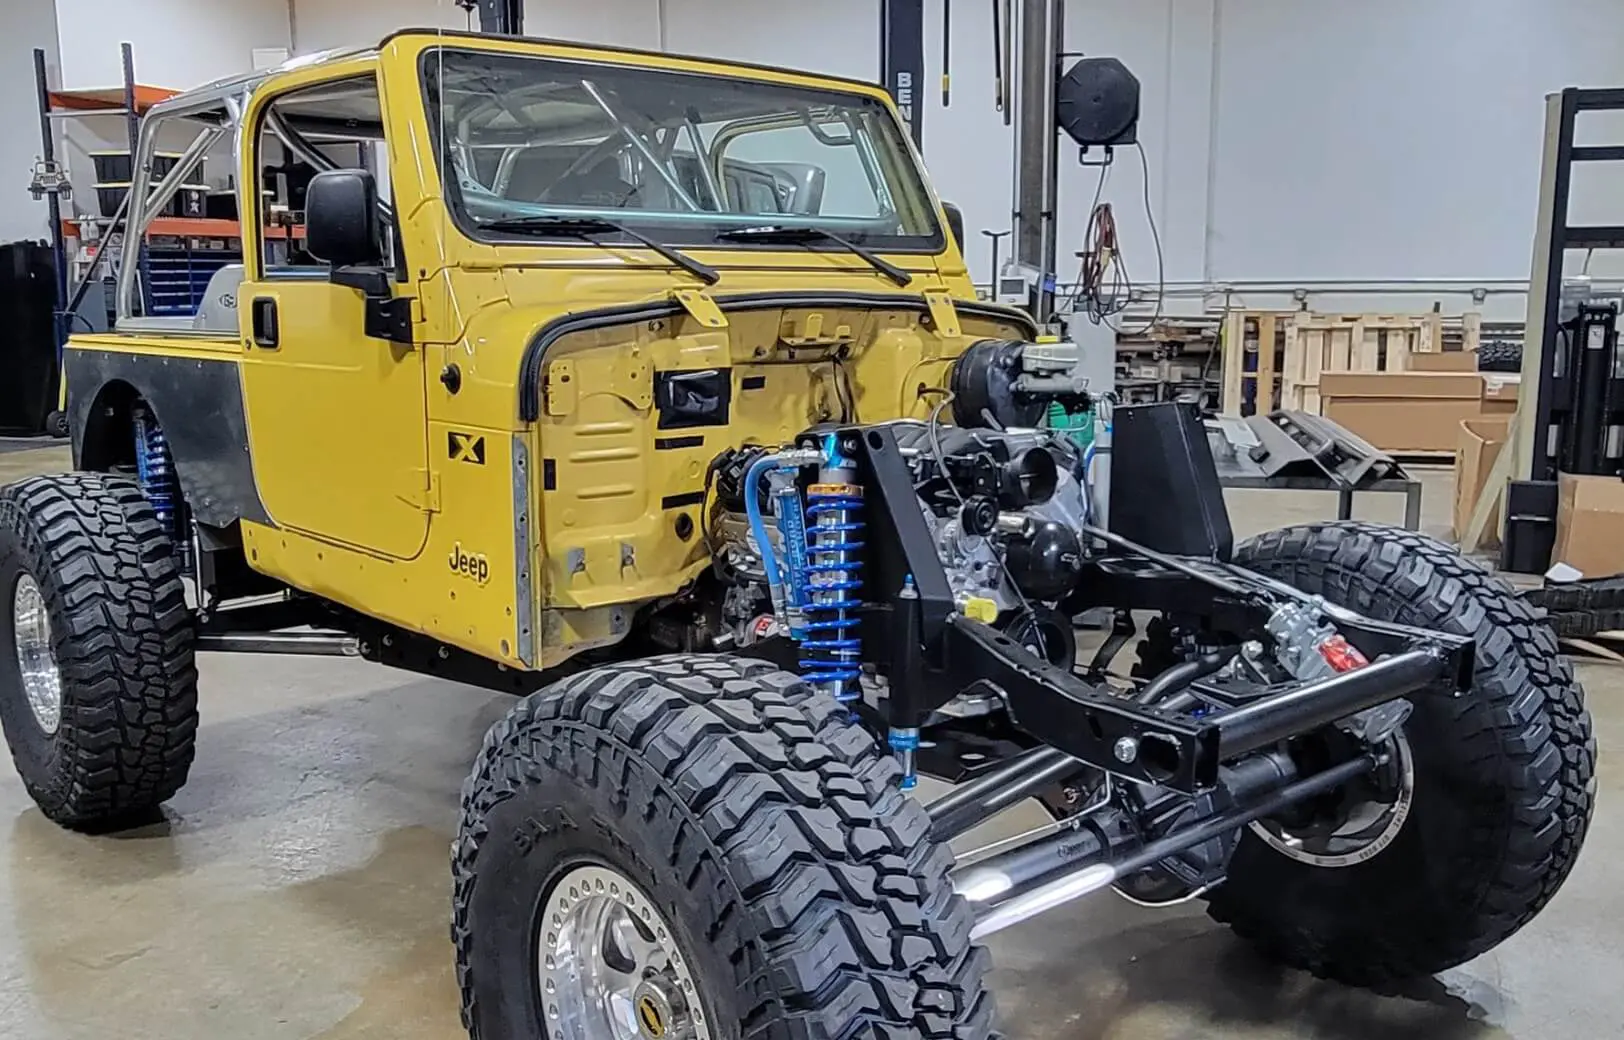 A yellow jeep is parked in the garage.